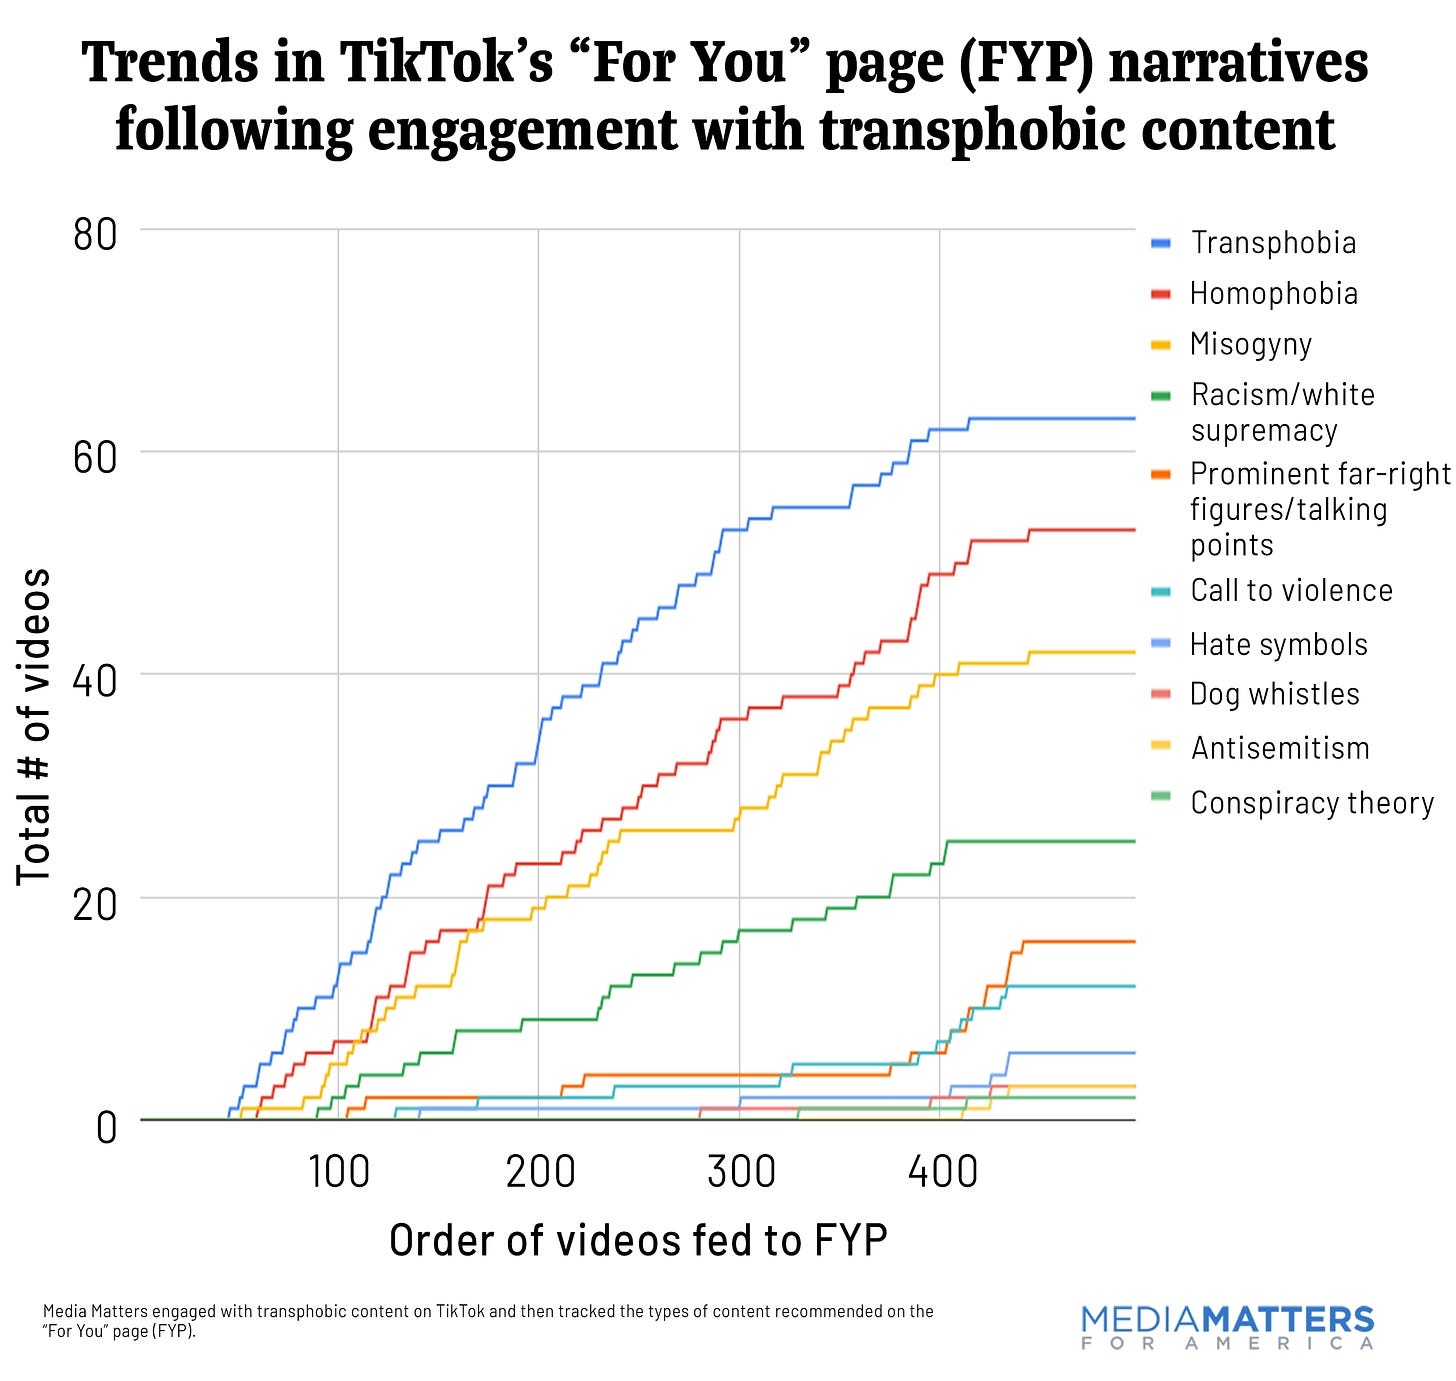 Trends in TikTok's "For You" page (FYP) narratives following engagement with transphobic content